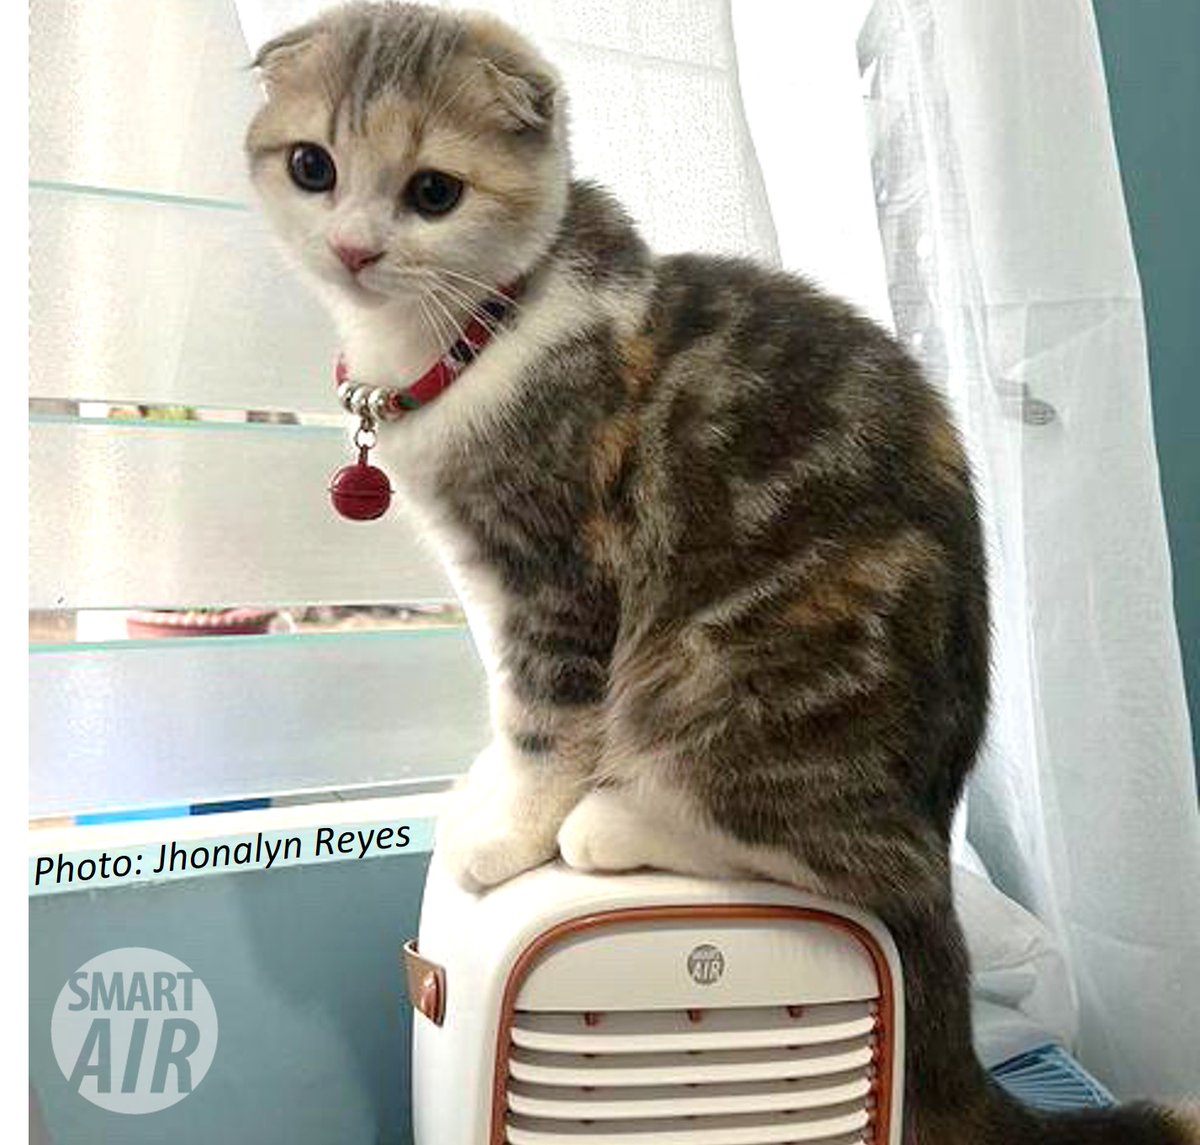 If you are allergic to pets, an air cleaner can reduce allergens in the air.

If you aren't allergic to cats, check out our cutie on a QT(3) travel air purifier 💕. 

Your furry friend needs to breathe clean air too 💨💨

#airquality #petdander #catsofTwitter #catsofinstagram